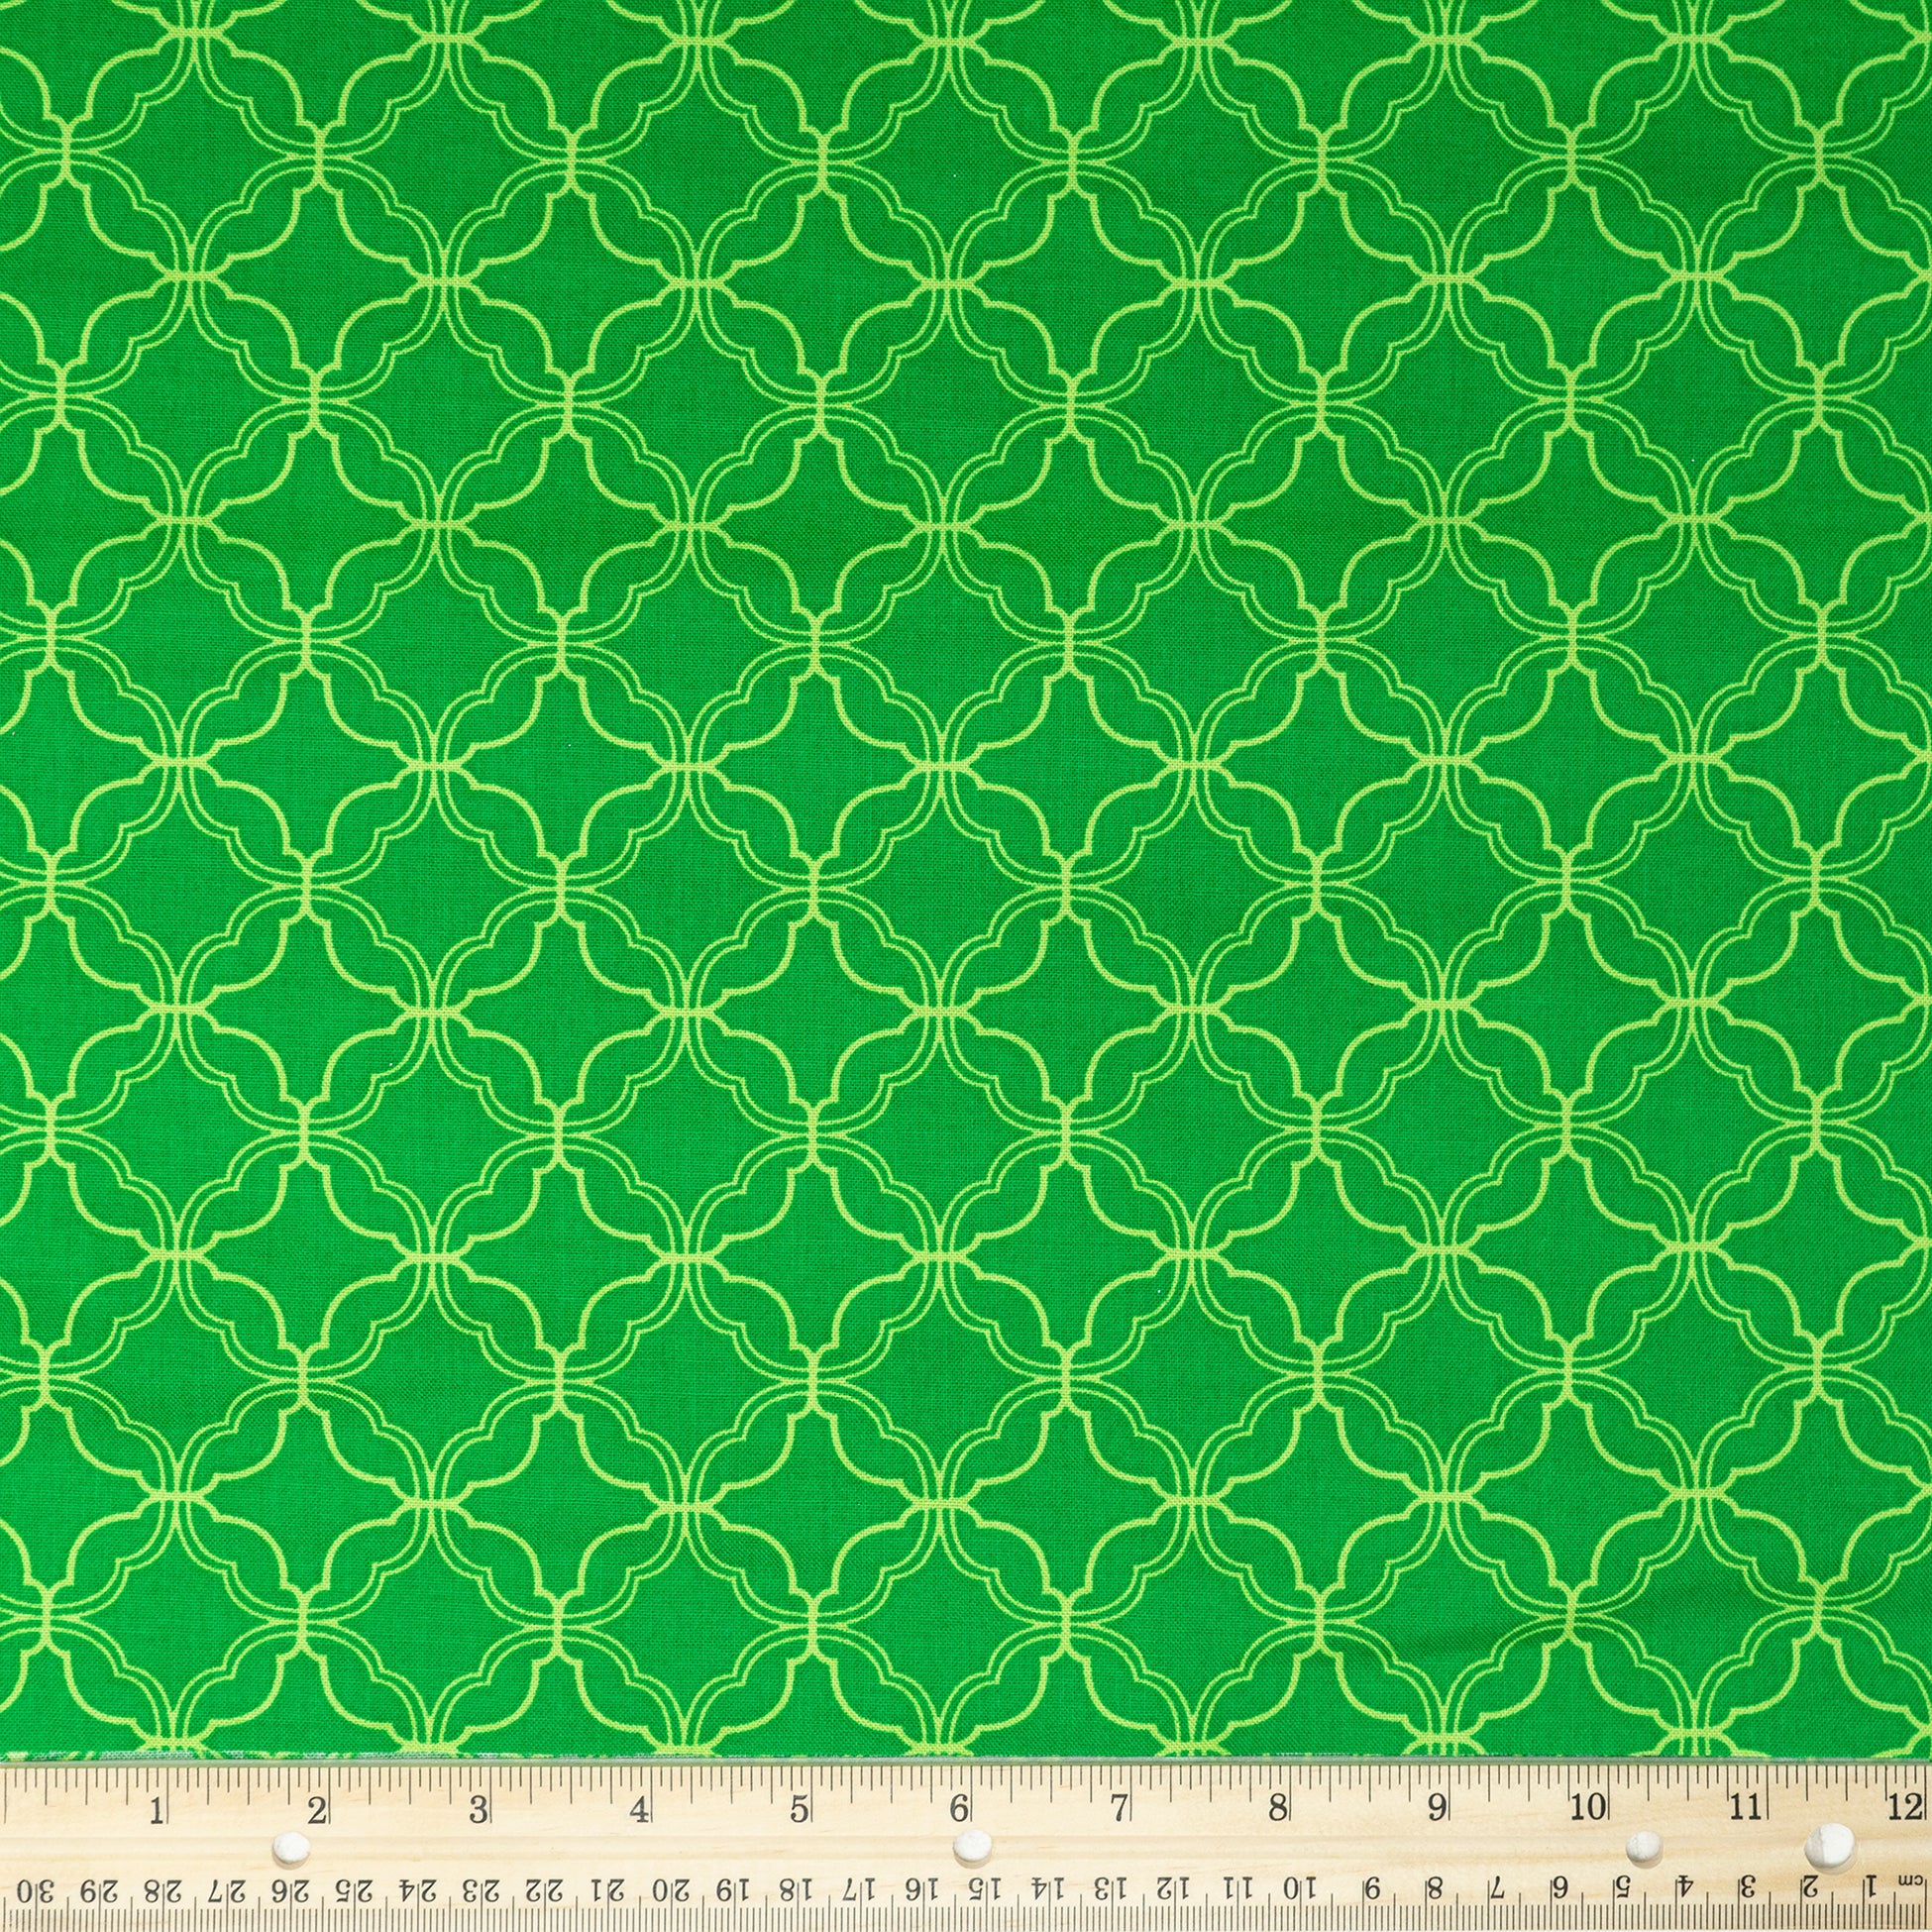 Waverly Inspirations Cotton 44" Mini Geometric Kelly Color Sewing Fabric by the Yard